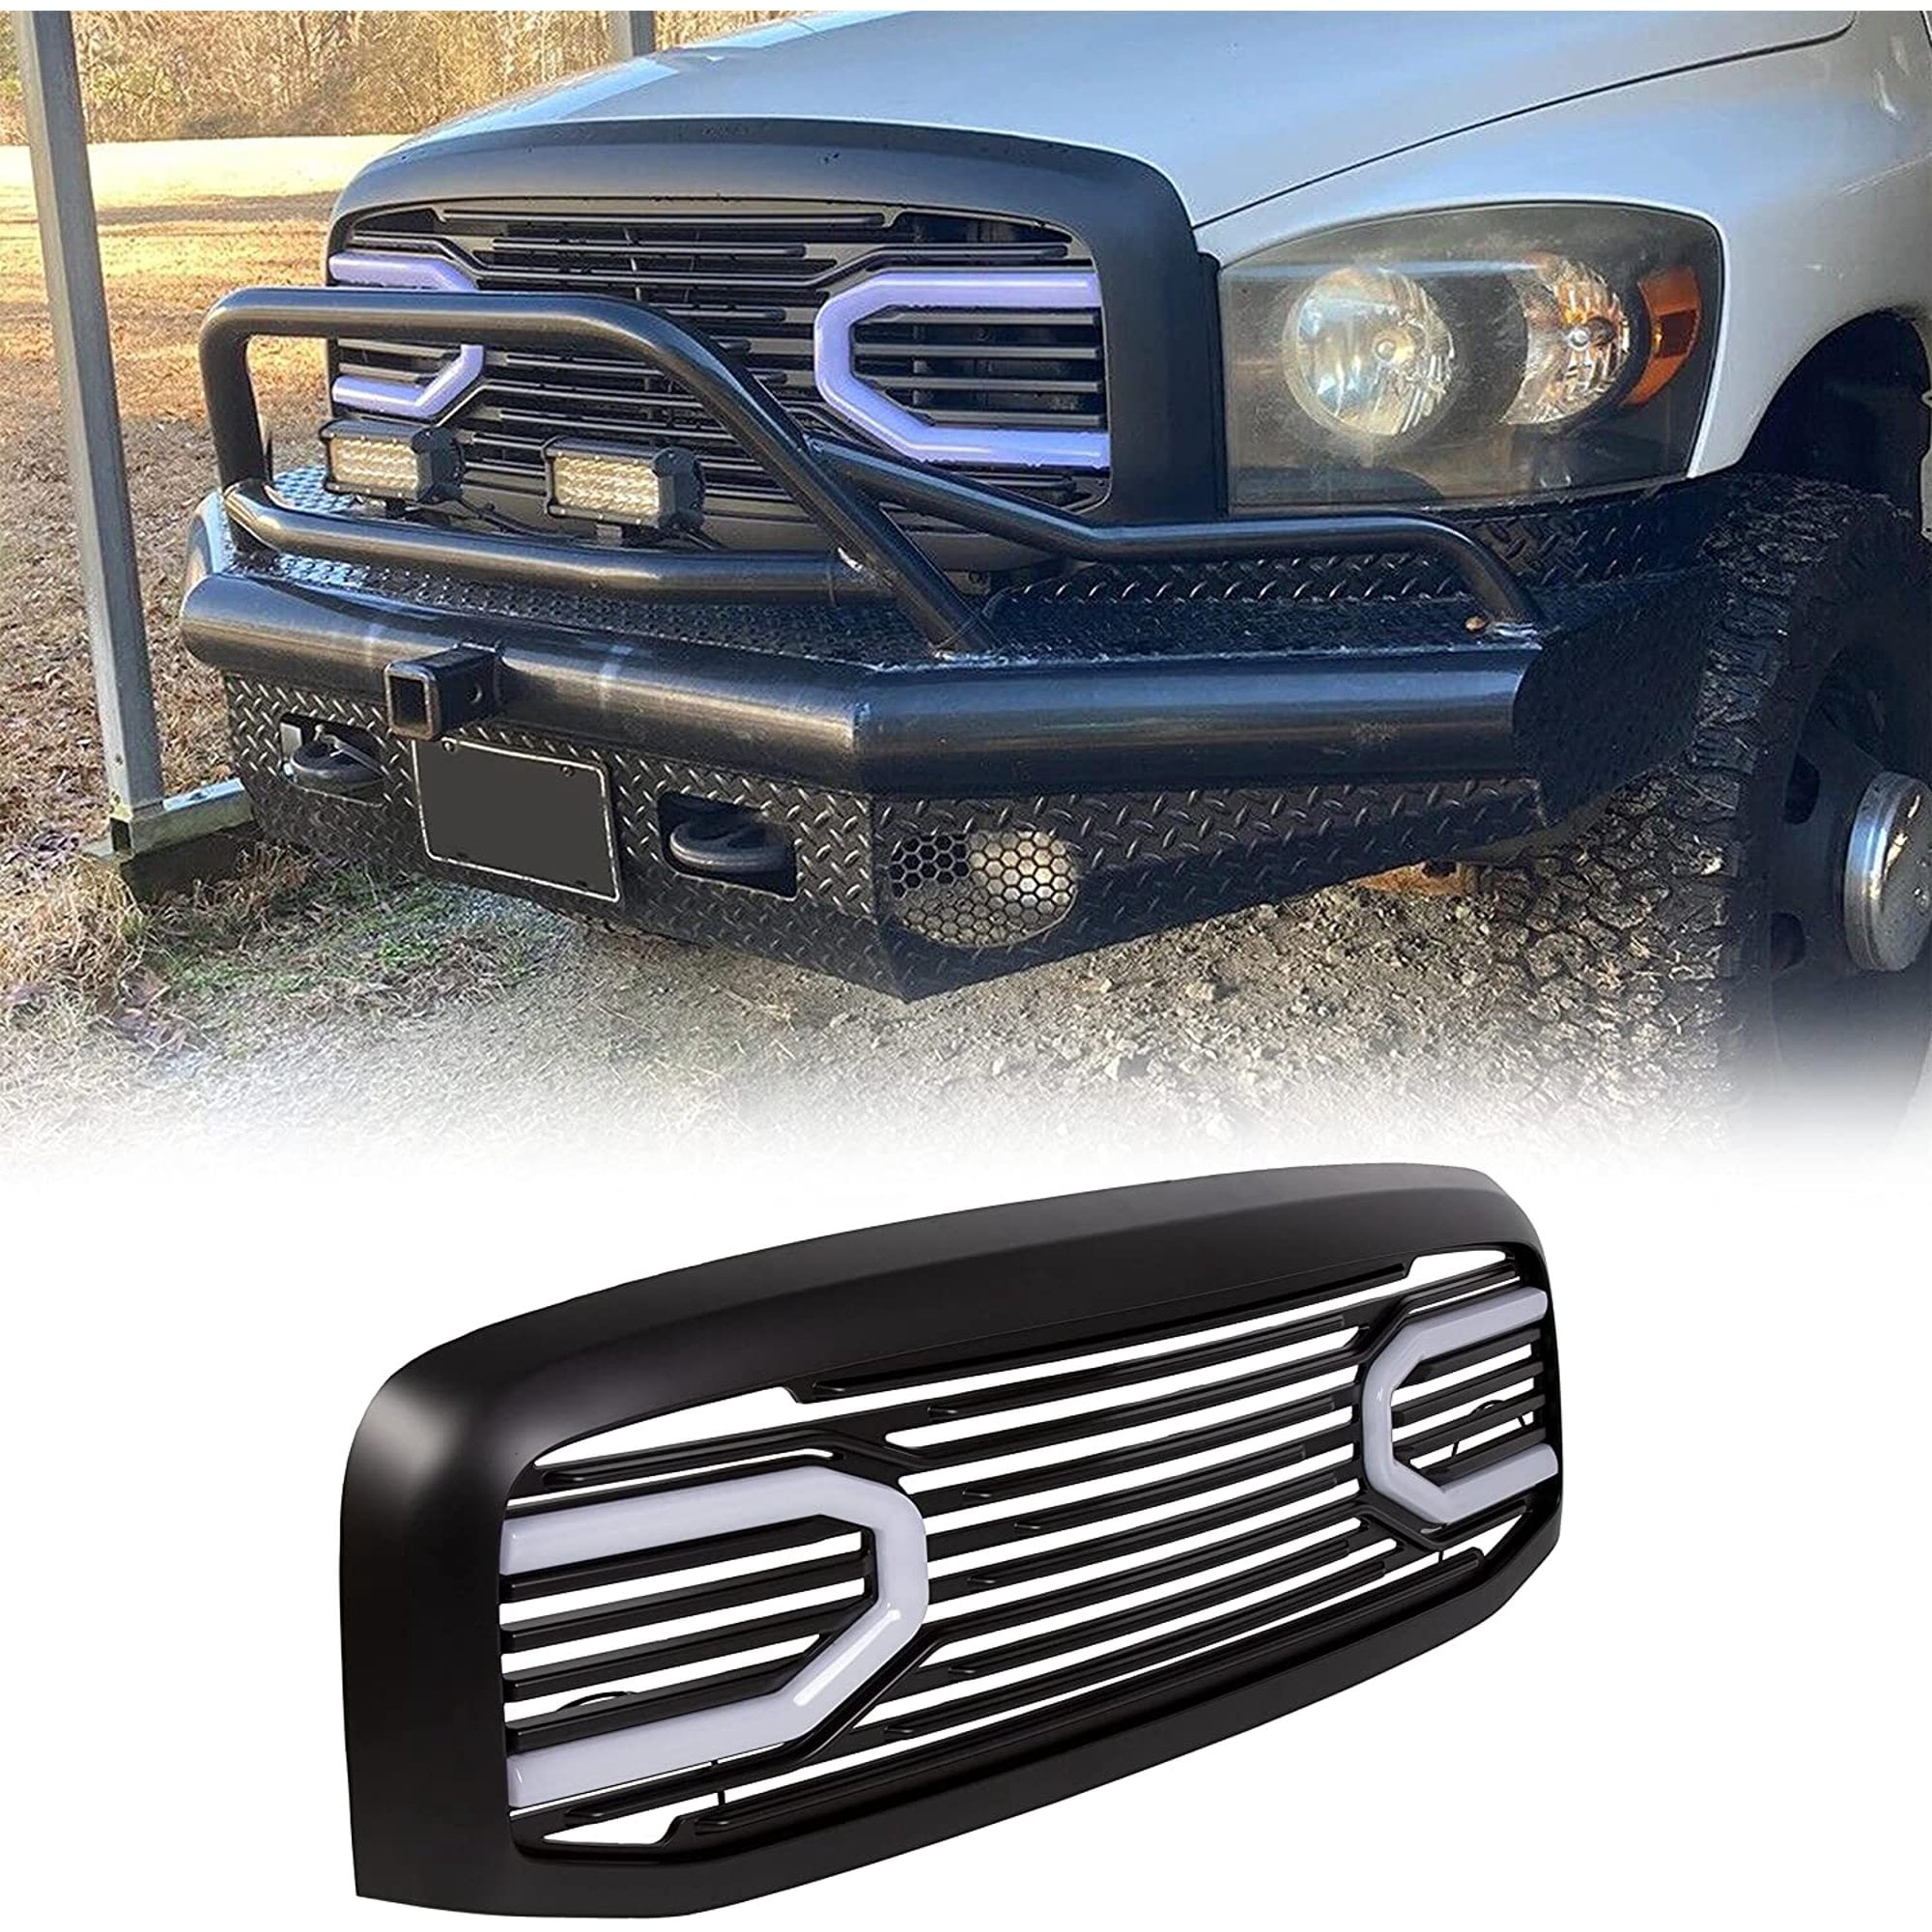 ECOTRIC For 2006 2007 2008 2009 RAM 1500 2500 3500 Front Big Horn Grille Replacement Shell W/O Light, Black 